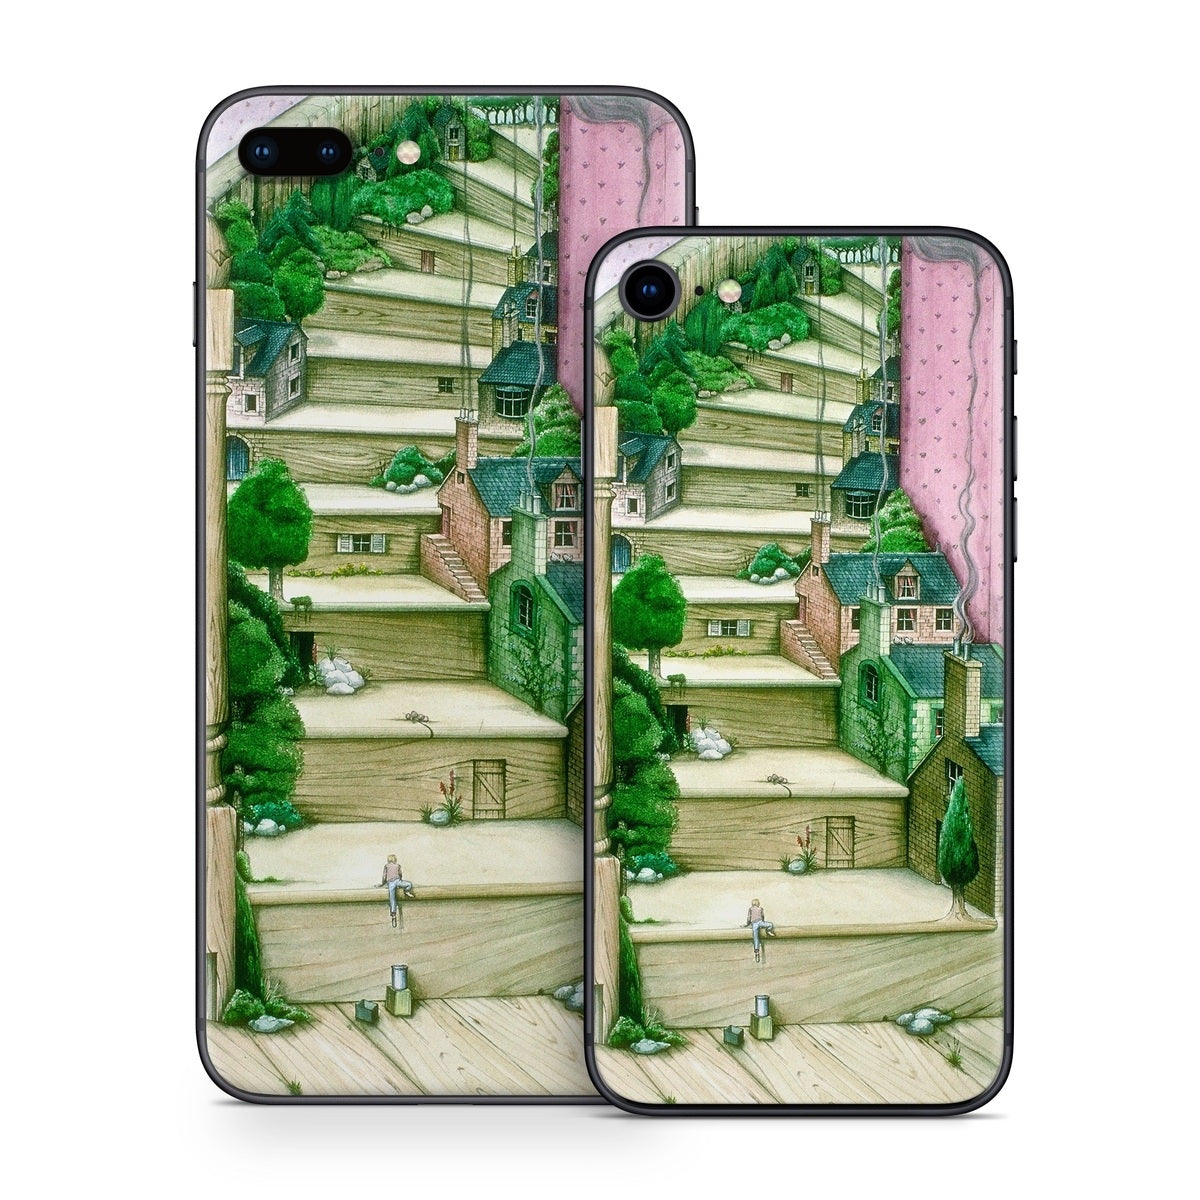 Living Stairs - Apple iPhone 8 Skin